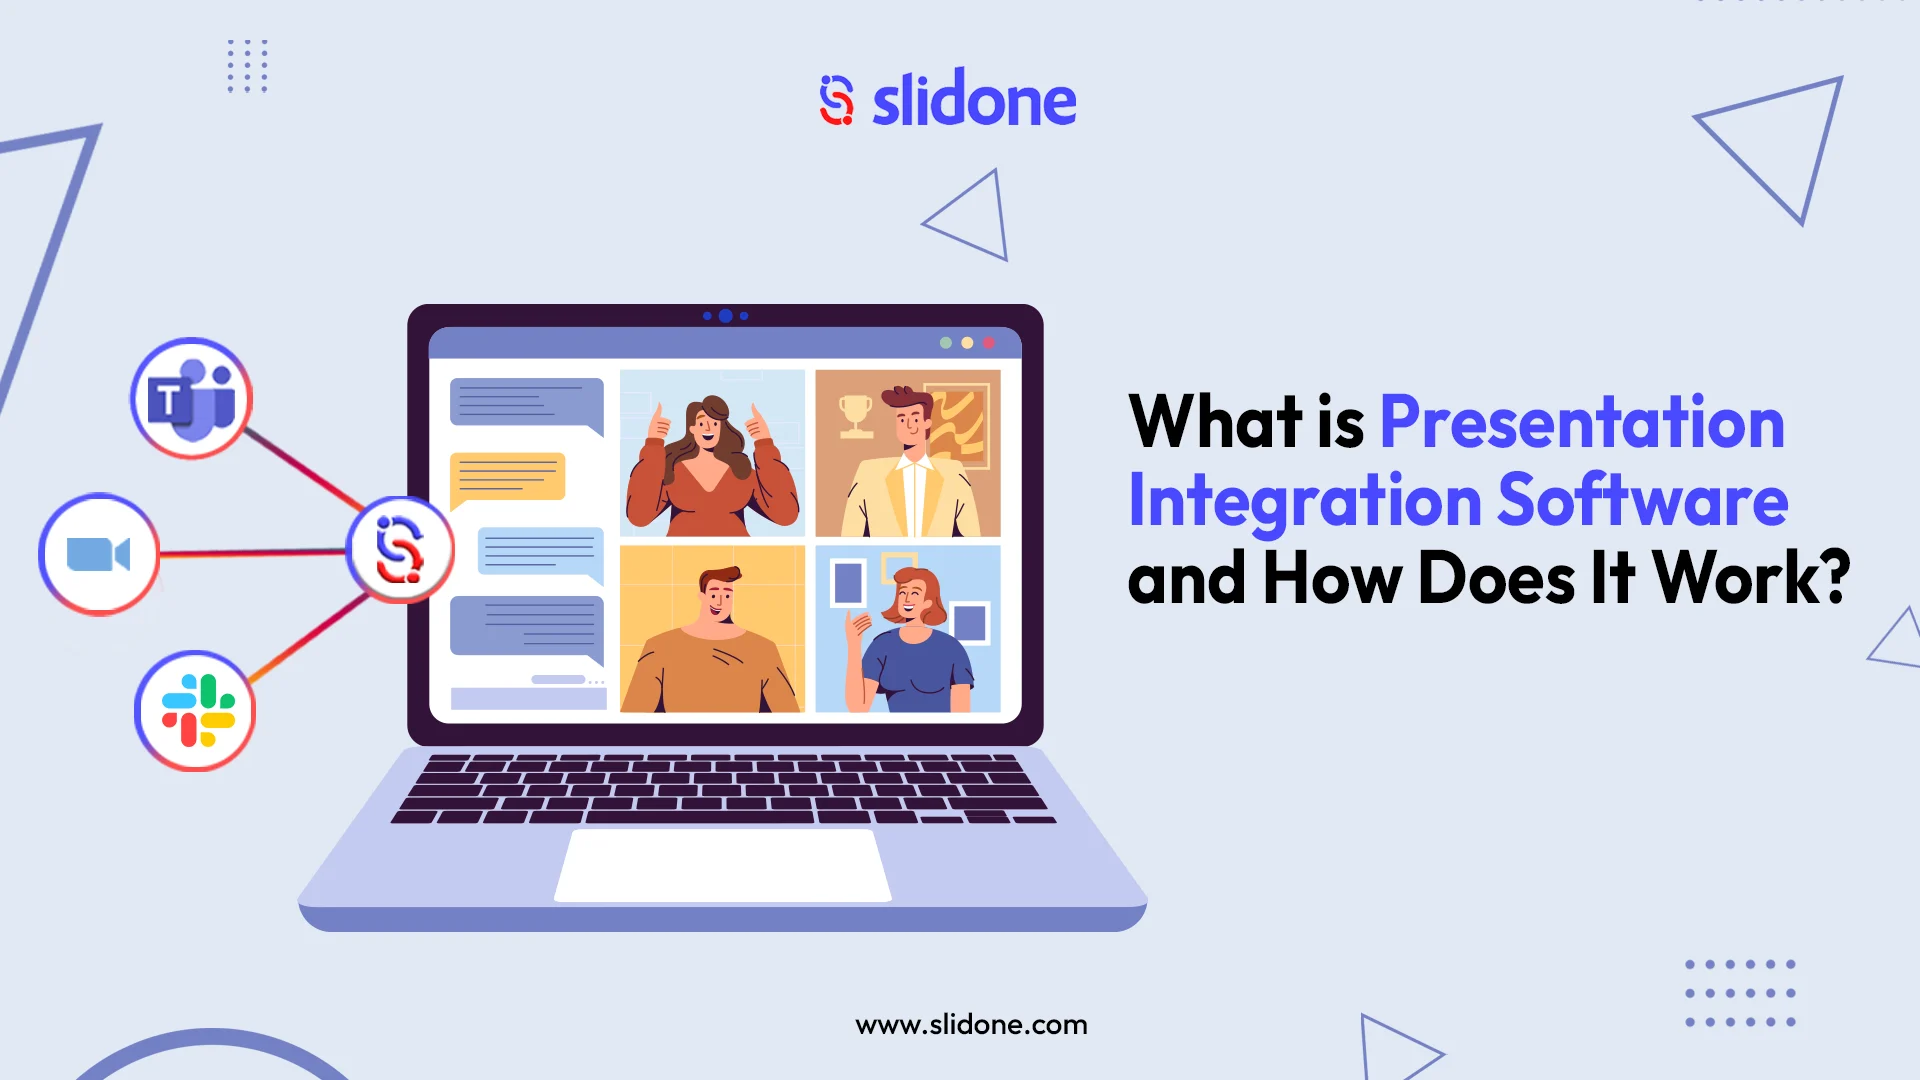 What is Presentation Integration Software and How Does It Work